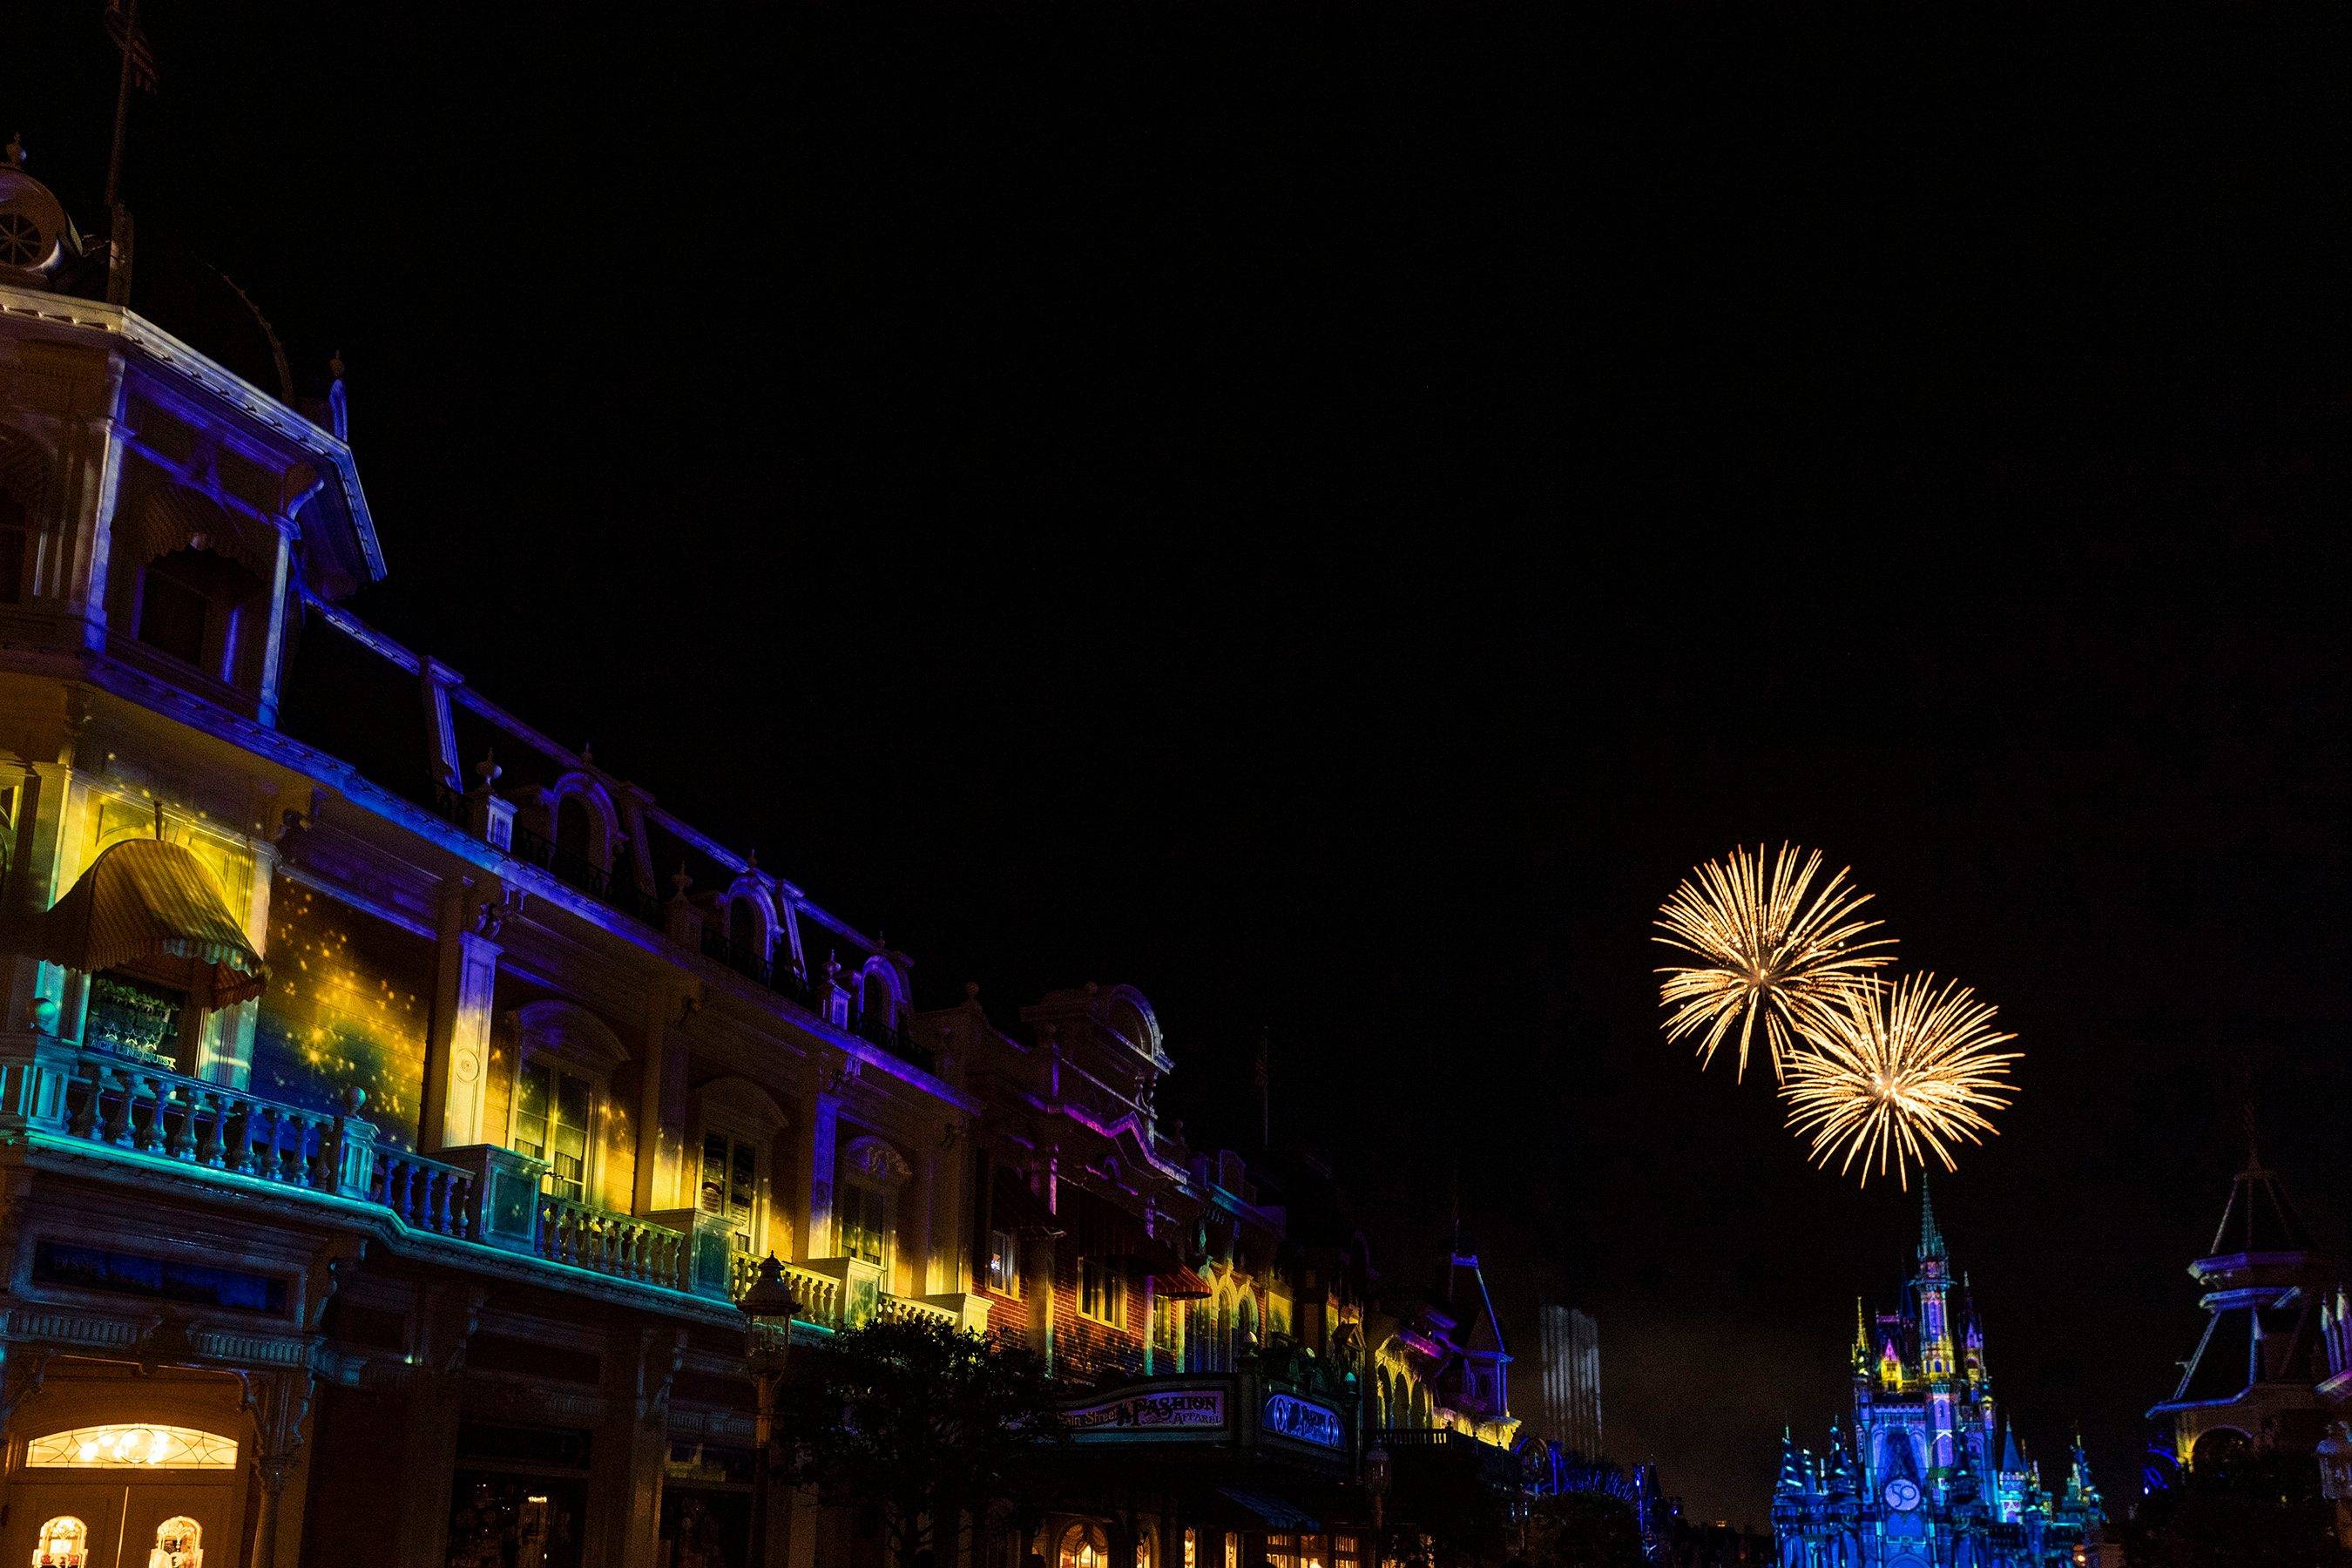 A look at the new Main Street U.S.A. projections added to Magic Kingdom's Happily Ever After firework spectacular